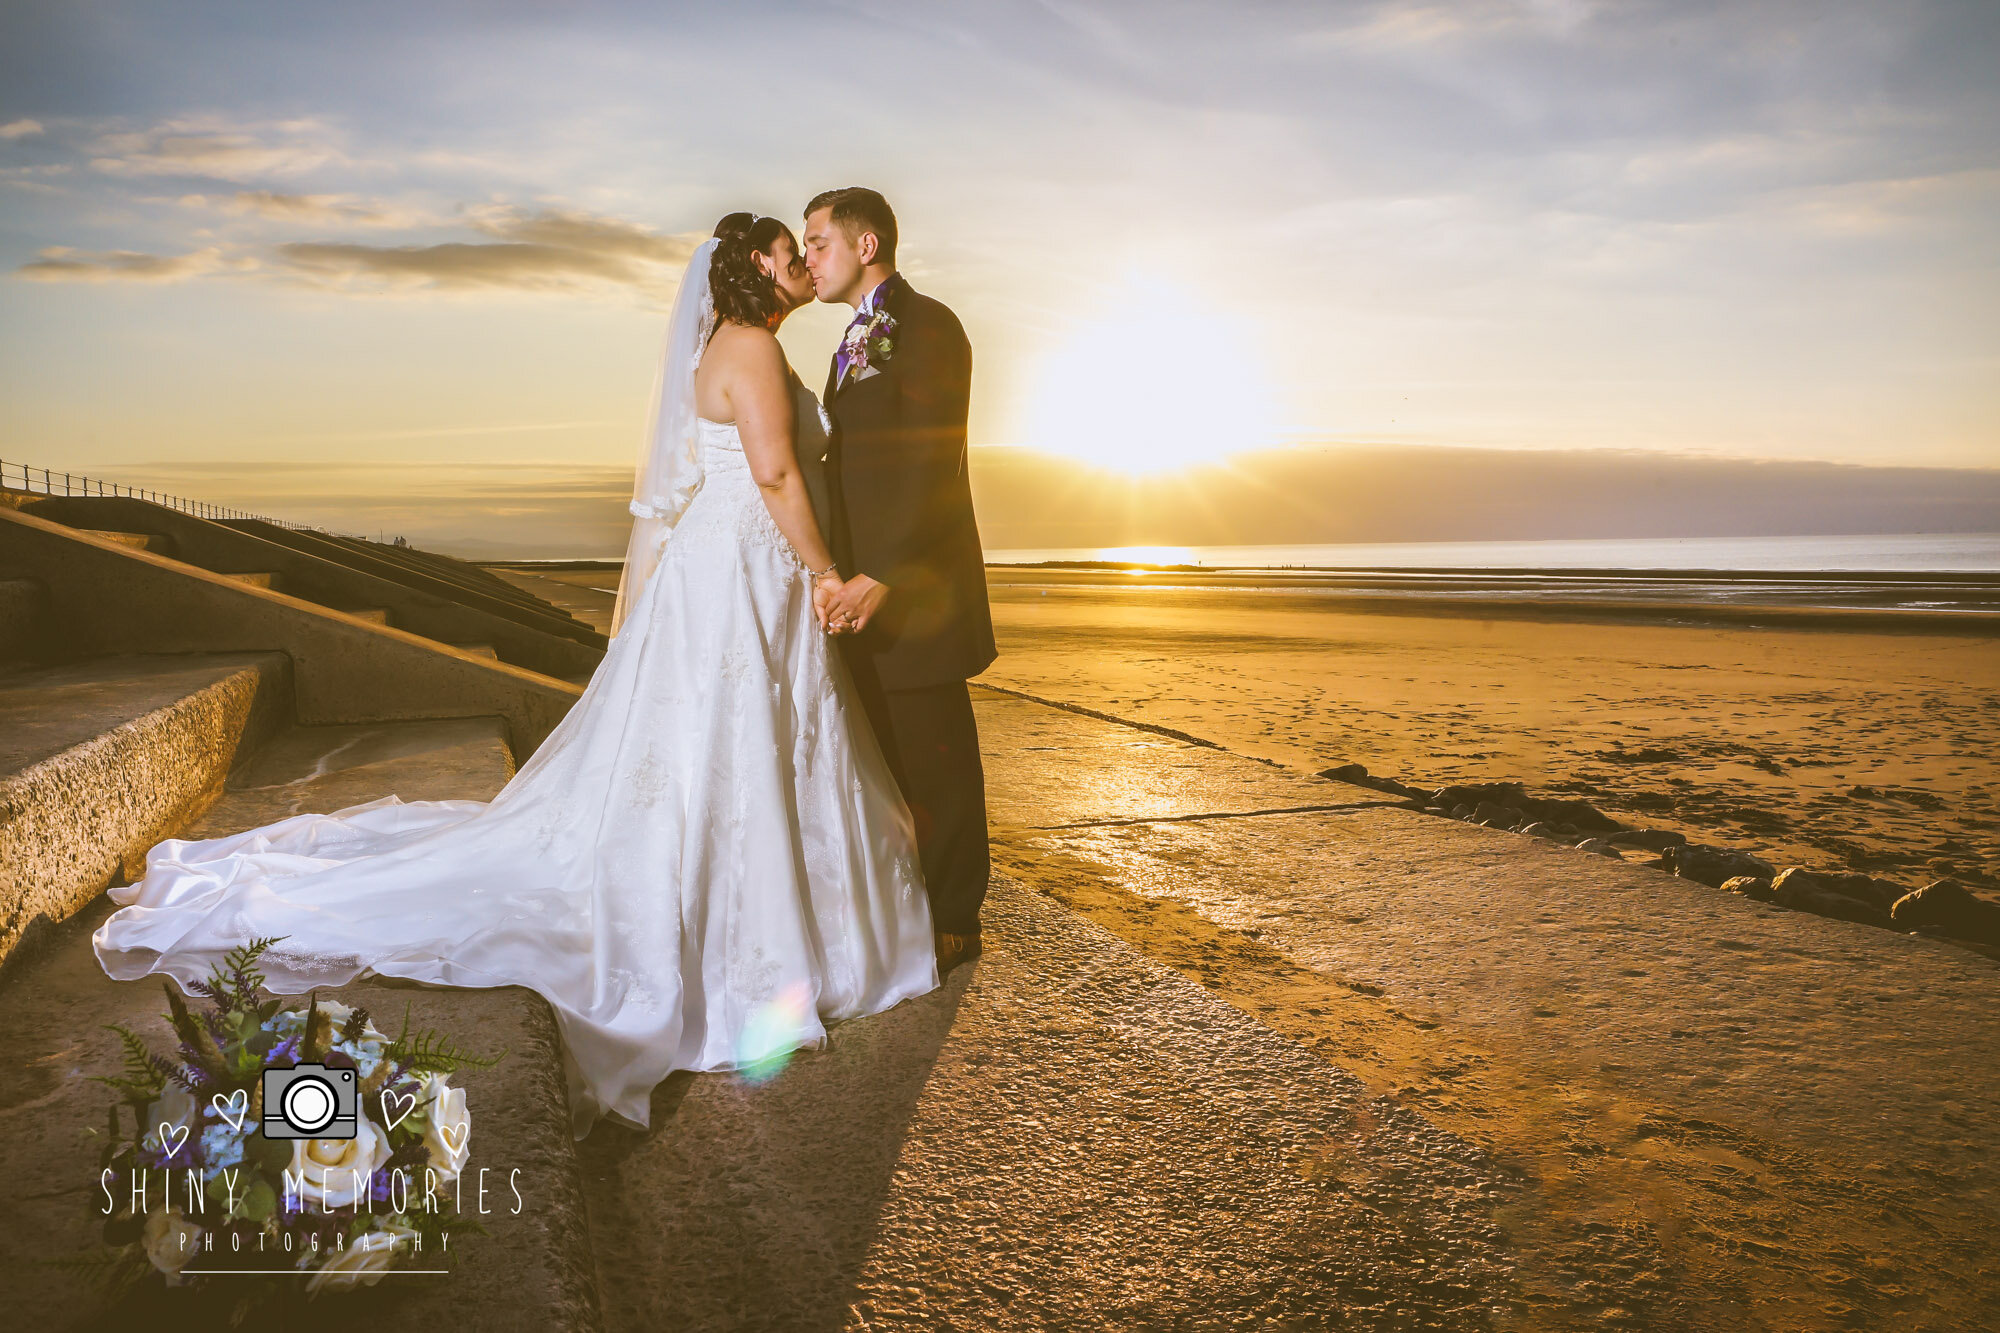 Shiny Memories North Wales Wedding Photographers - The Beaches - Pentre Mawr Country House-9.jpg